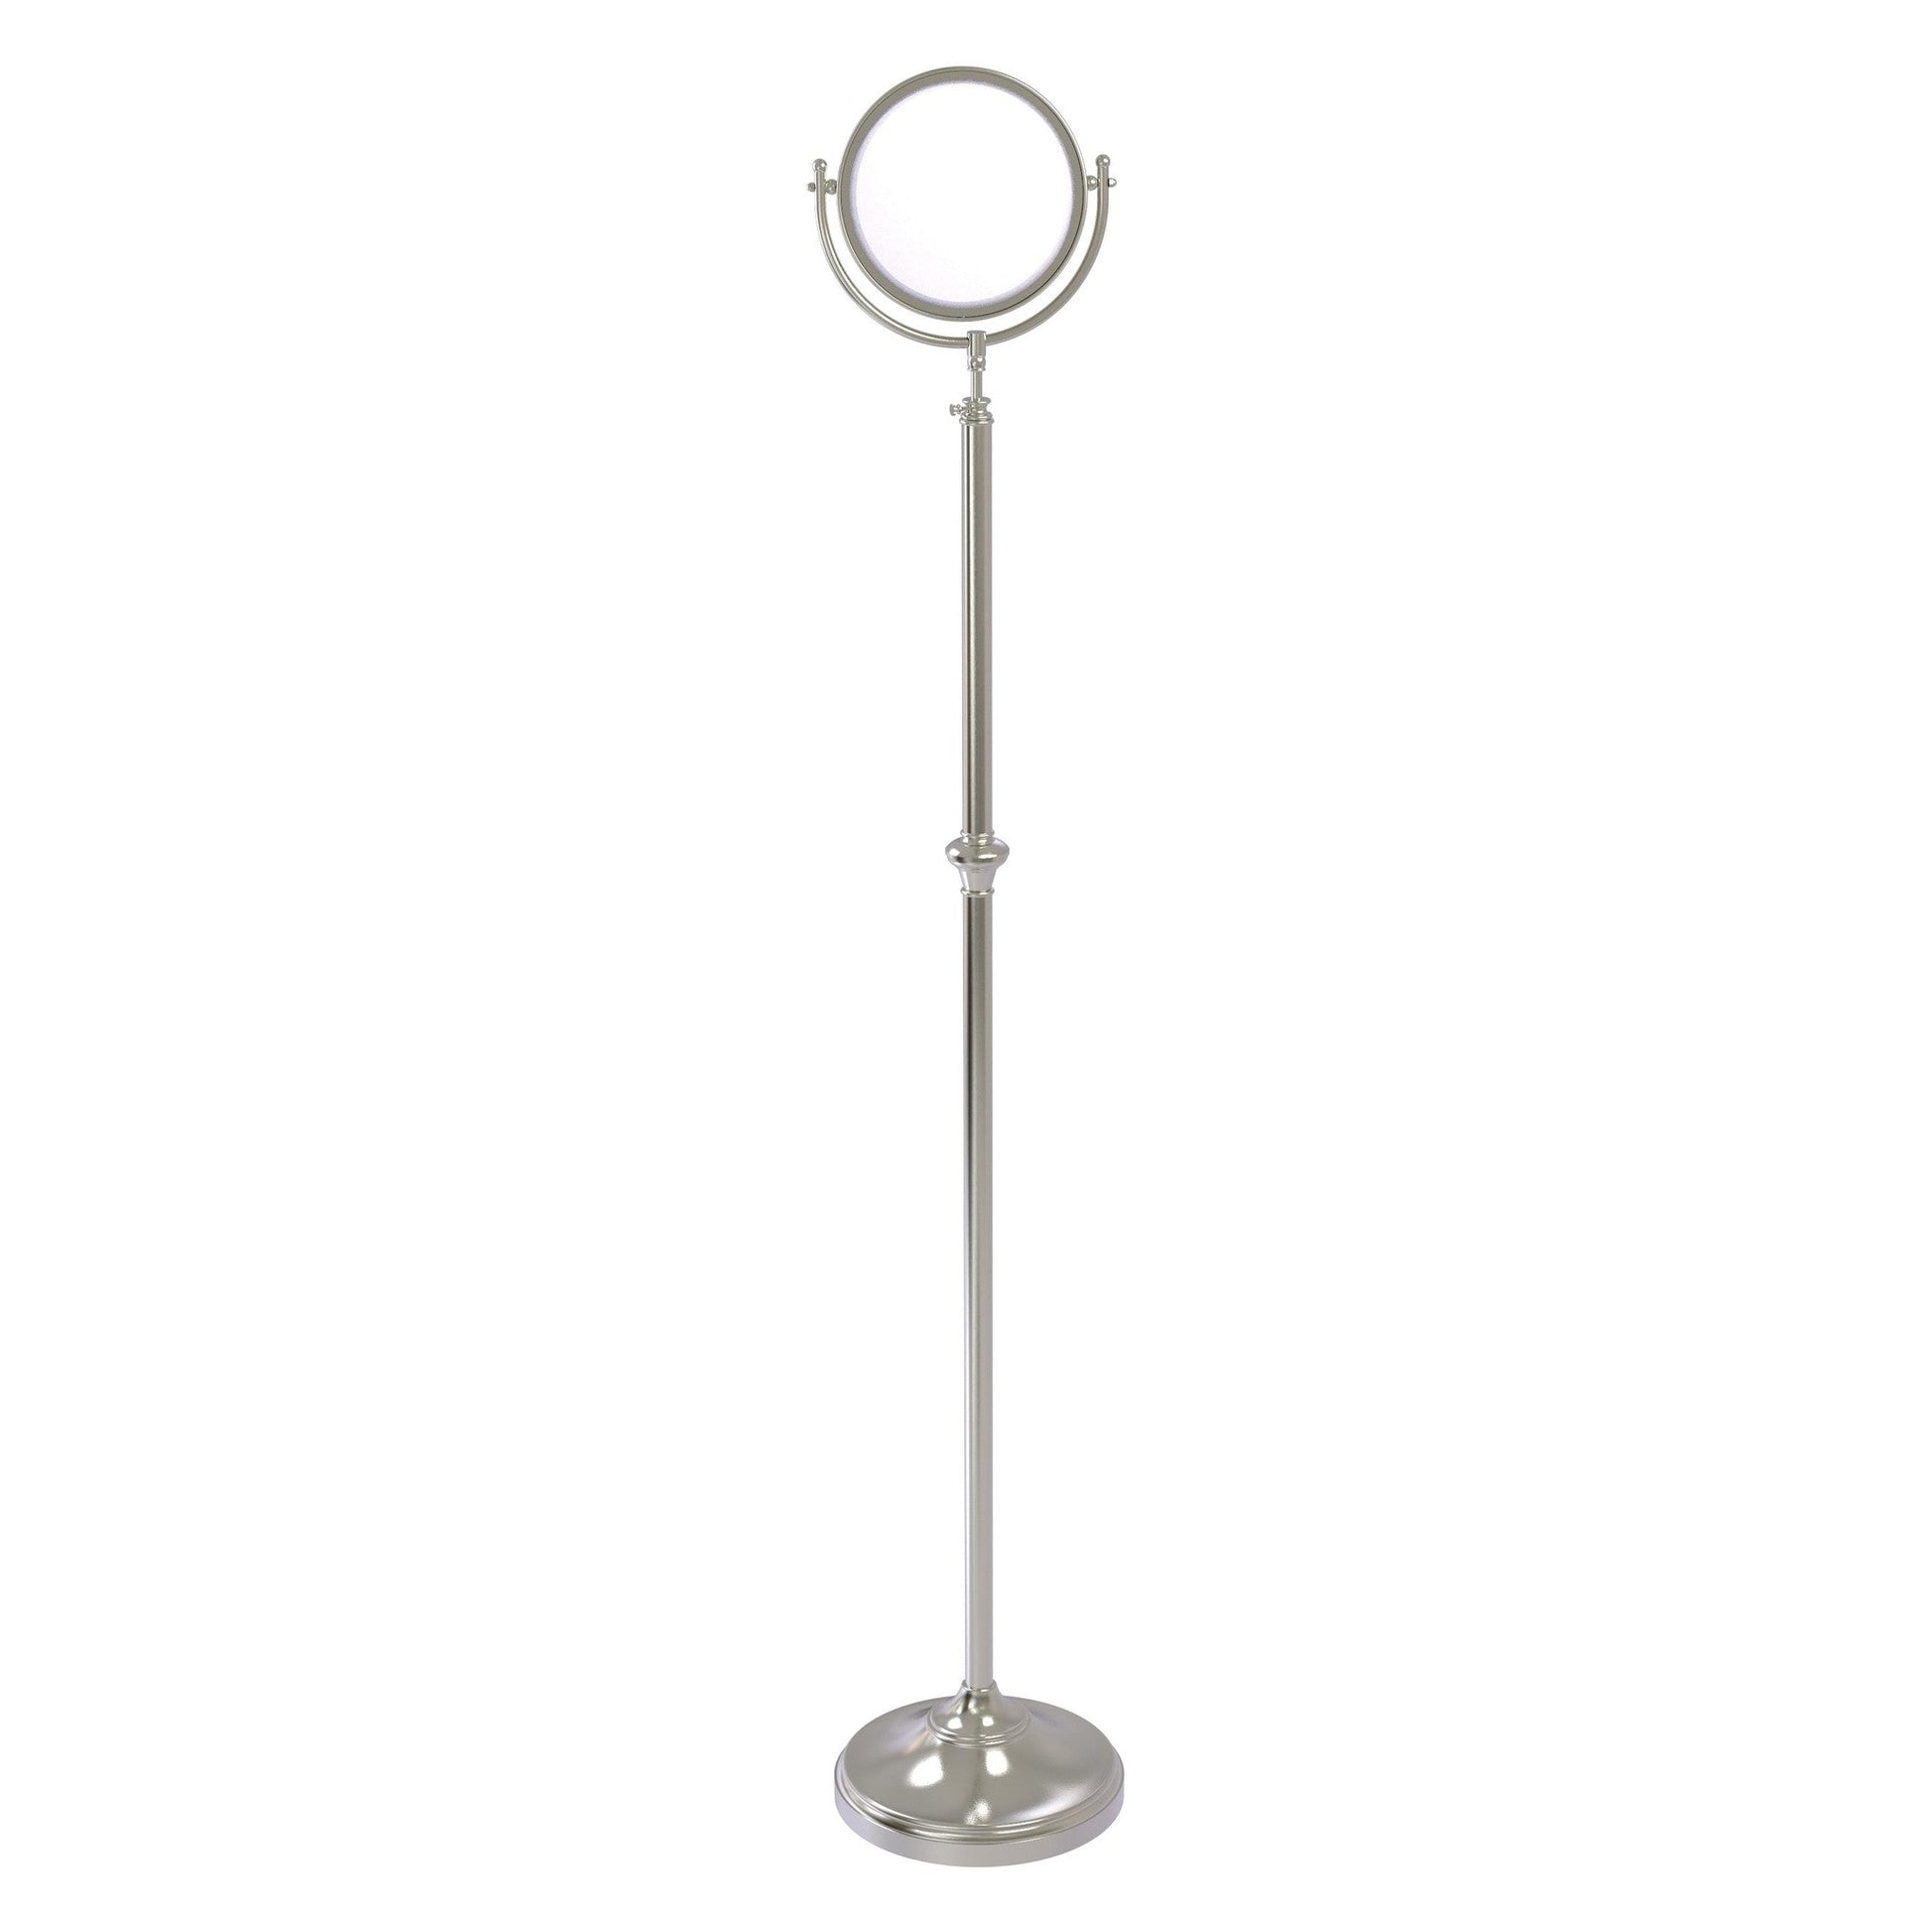 Allied Brass DMF-2/5X 10.5" x 10.5" Satin Nickel Solid Brass Adjustable Height Floor Standing Make-Up Mirror With 5X Magnification